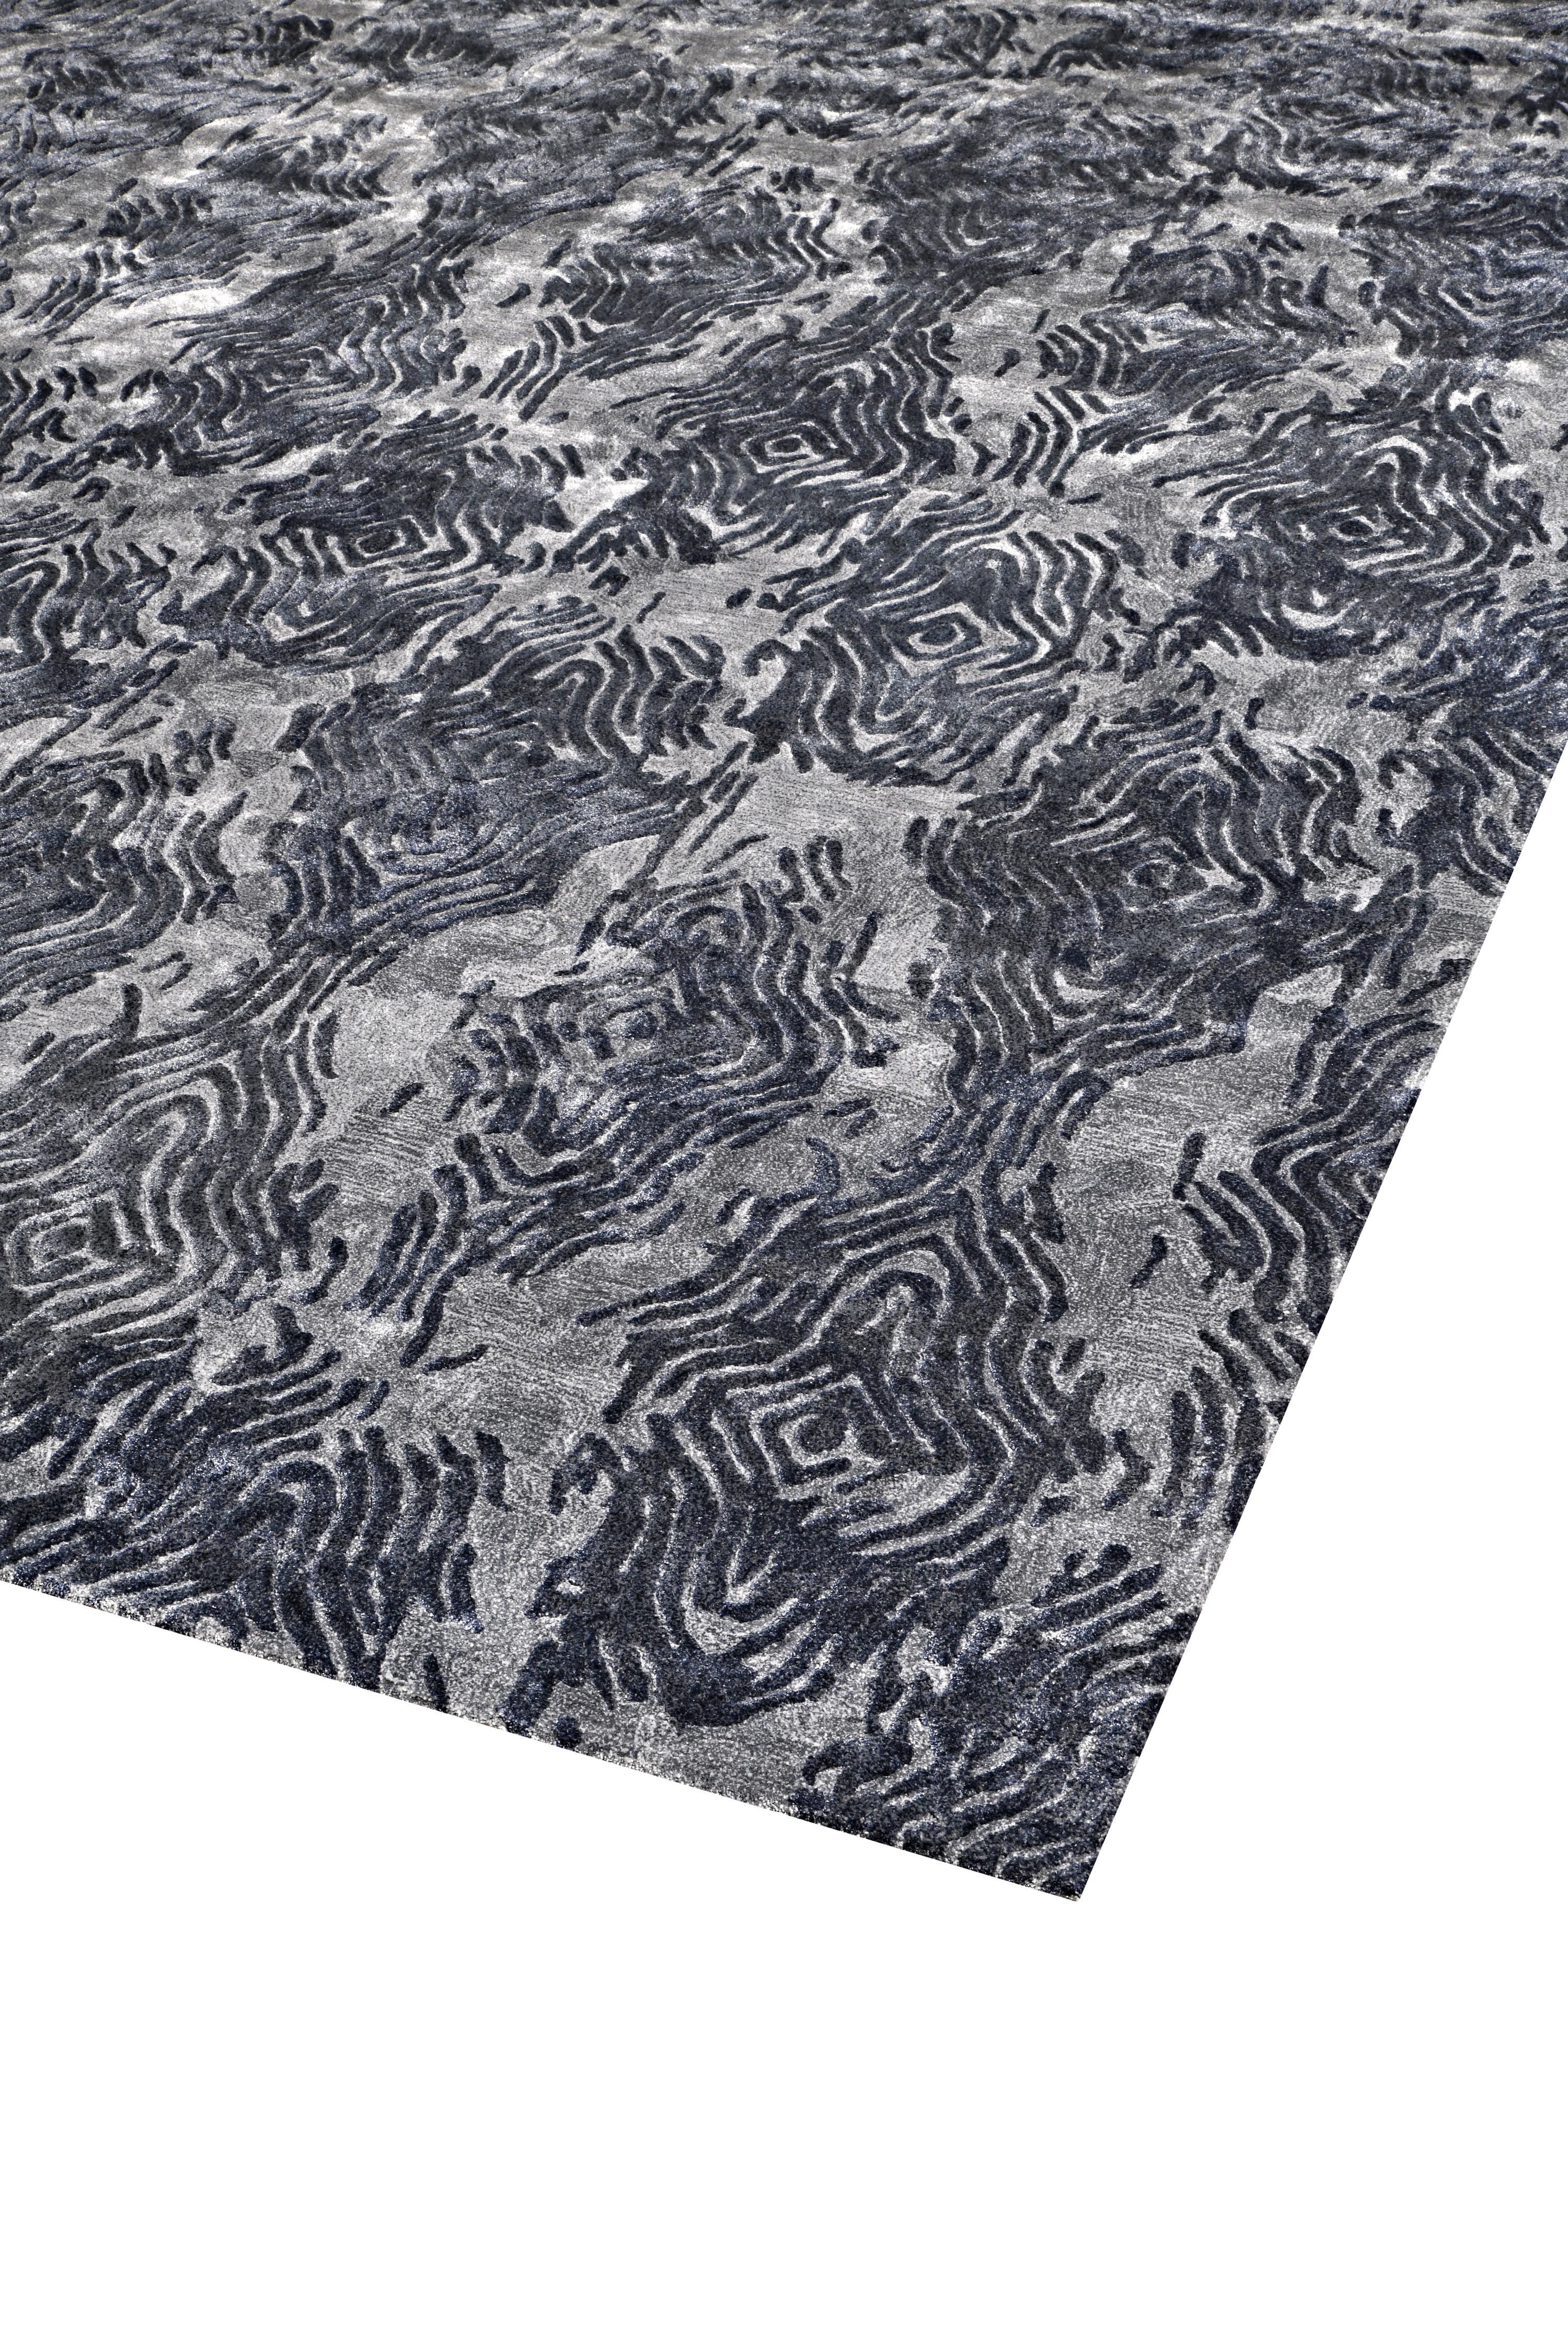 Bamboo MASSIF Hand Tufted Contemporary Rug in Grey Gold and Taupe Grey Colours By Hands For Sale